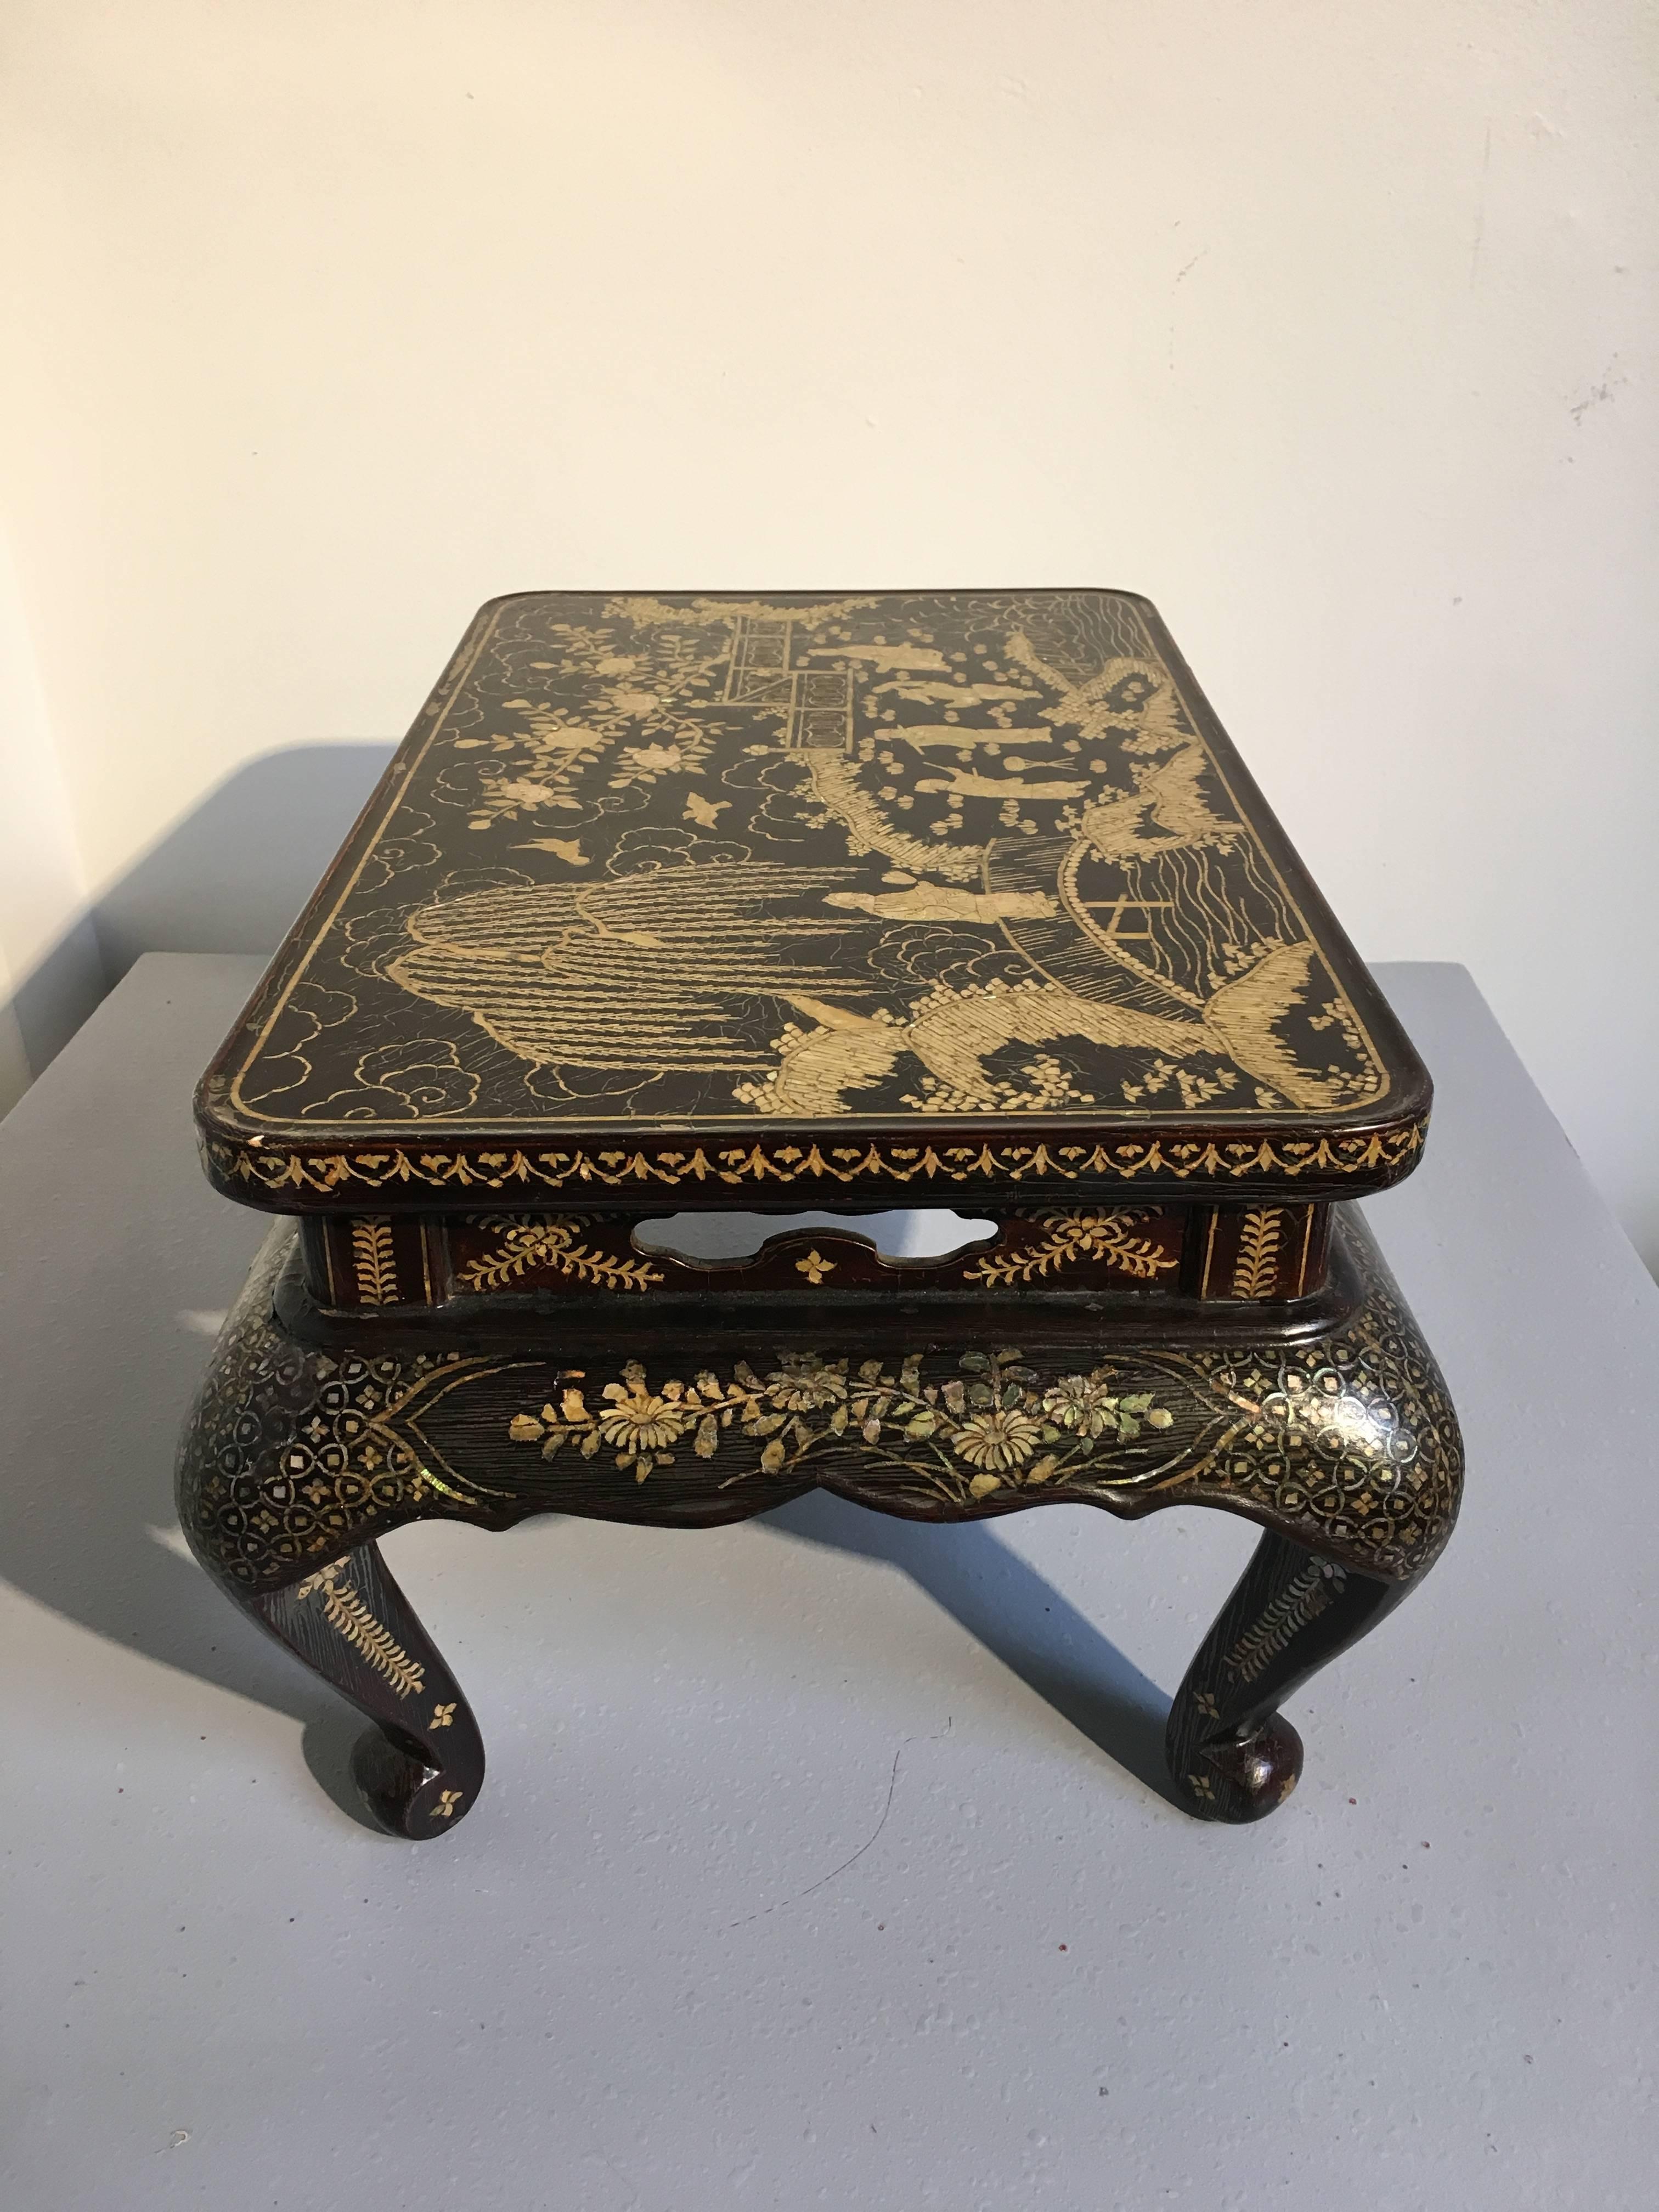 Qing Dynasty Chinese Lacquer and Mother-of-Pearl Small Table, 18th-19th Century 2